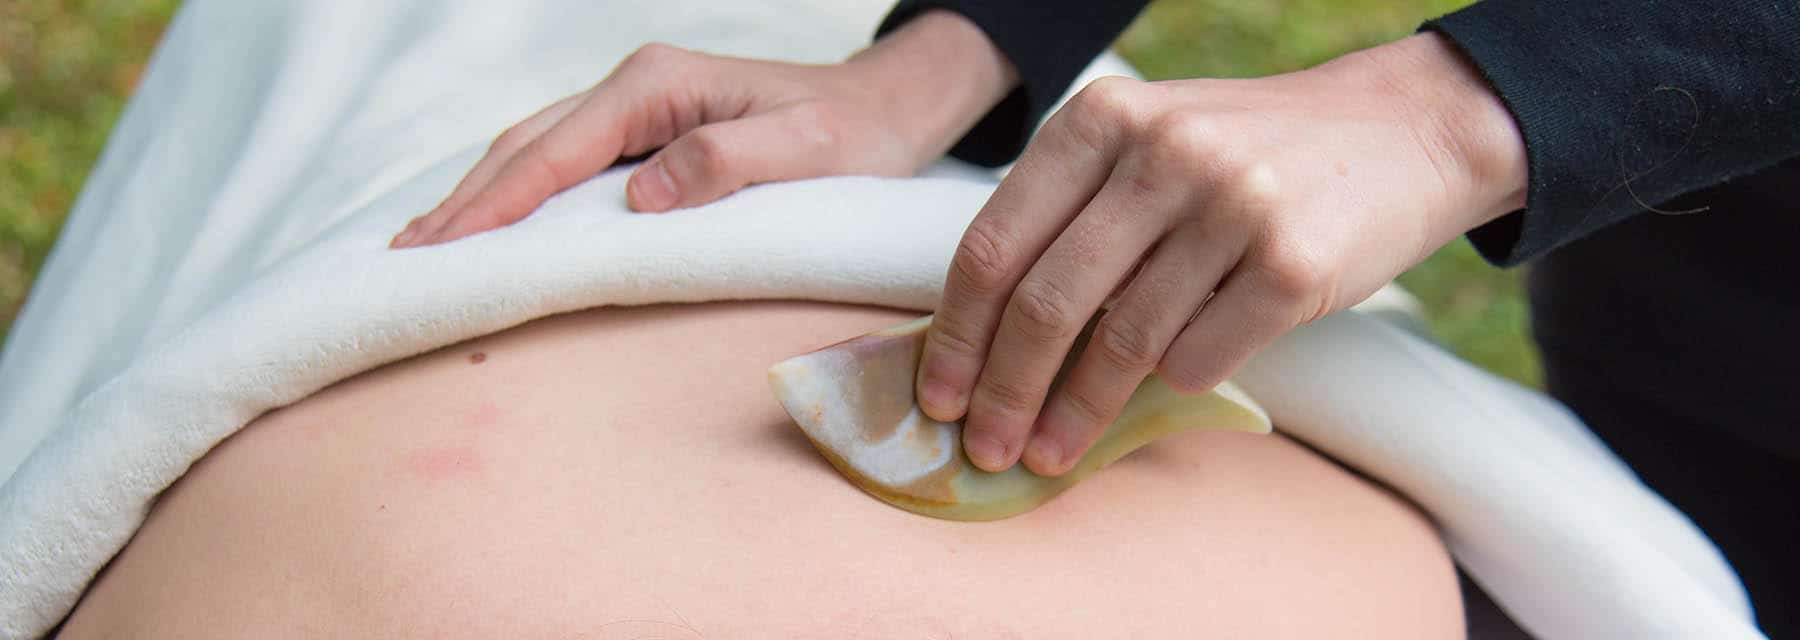 Best gua sha scraping at Acupuncture Center Toronto